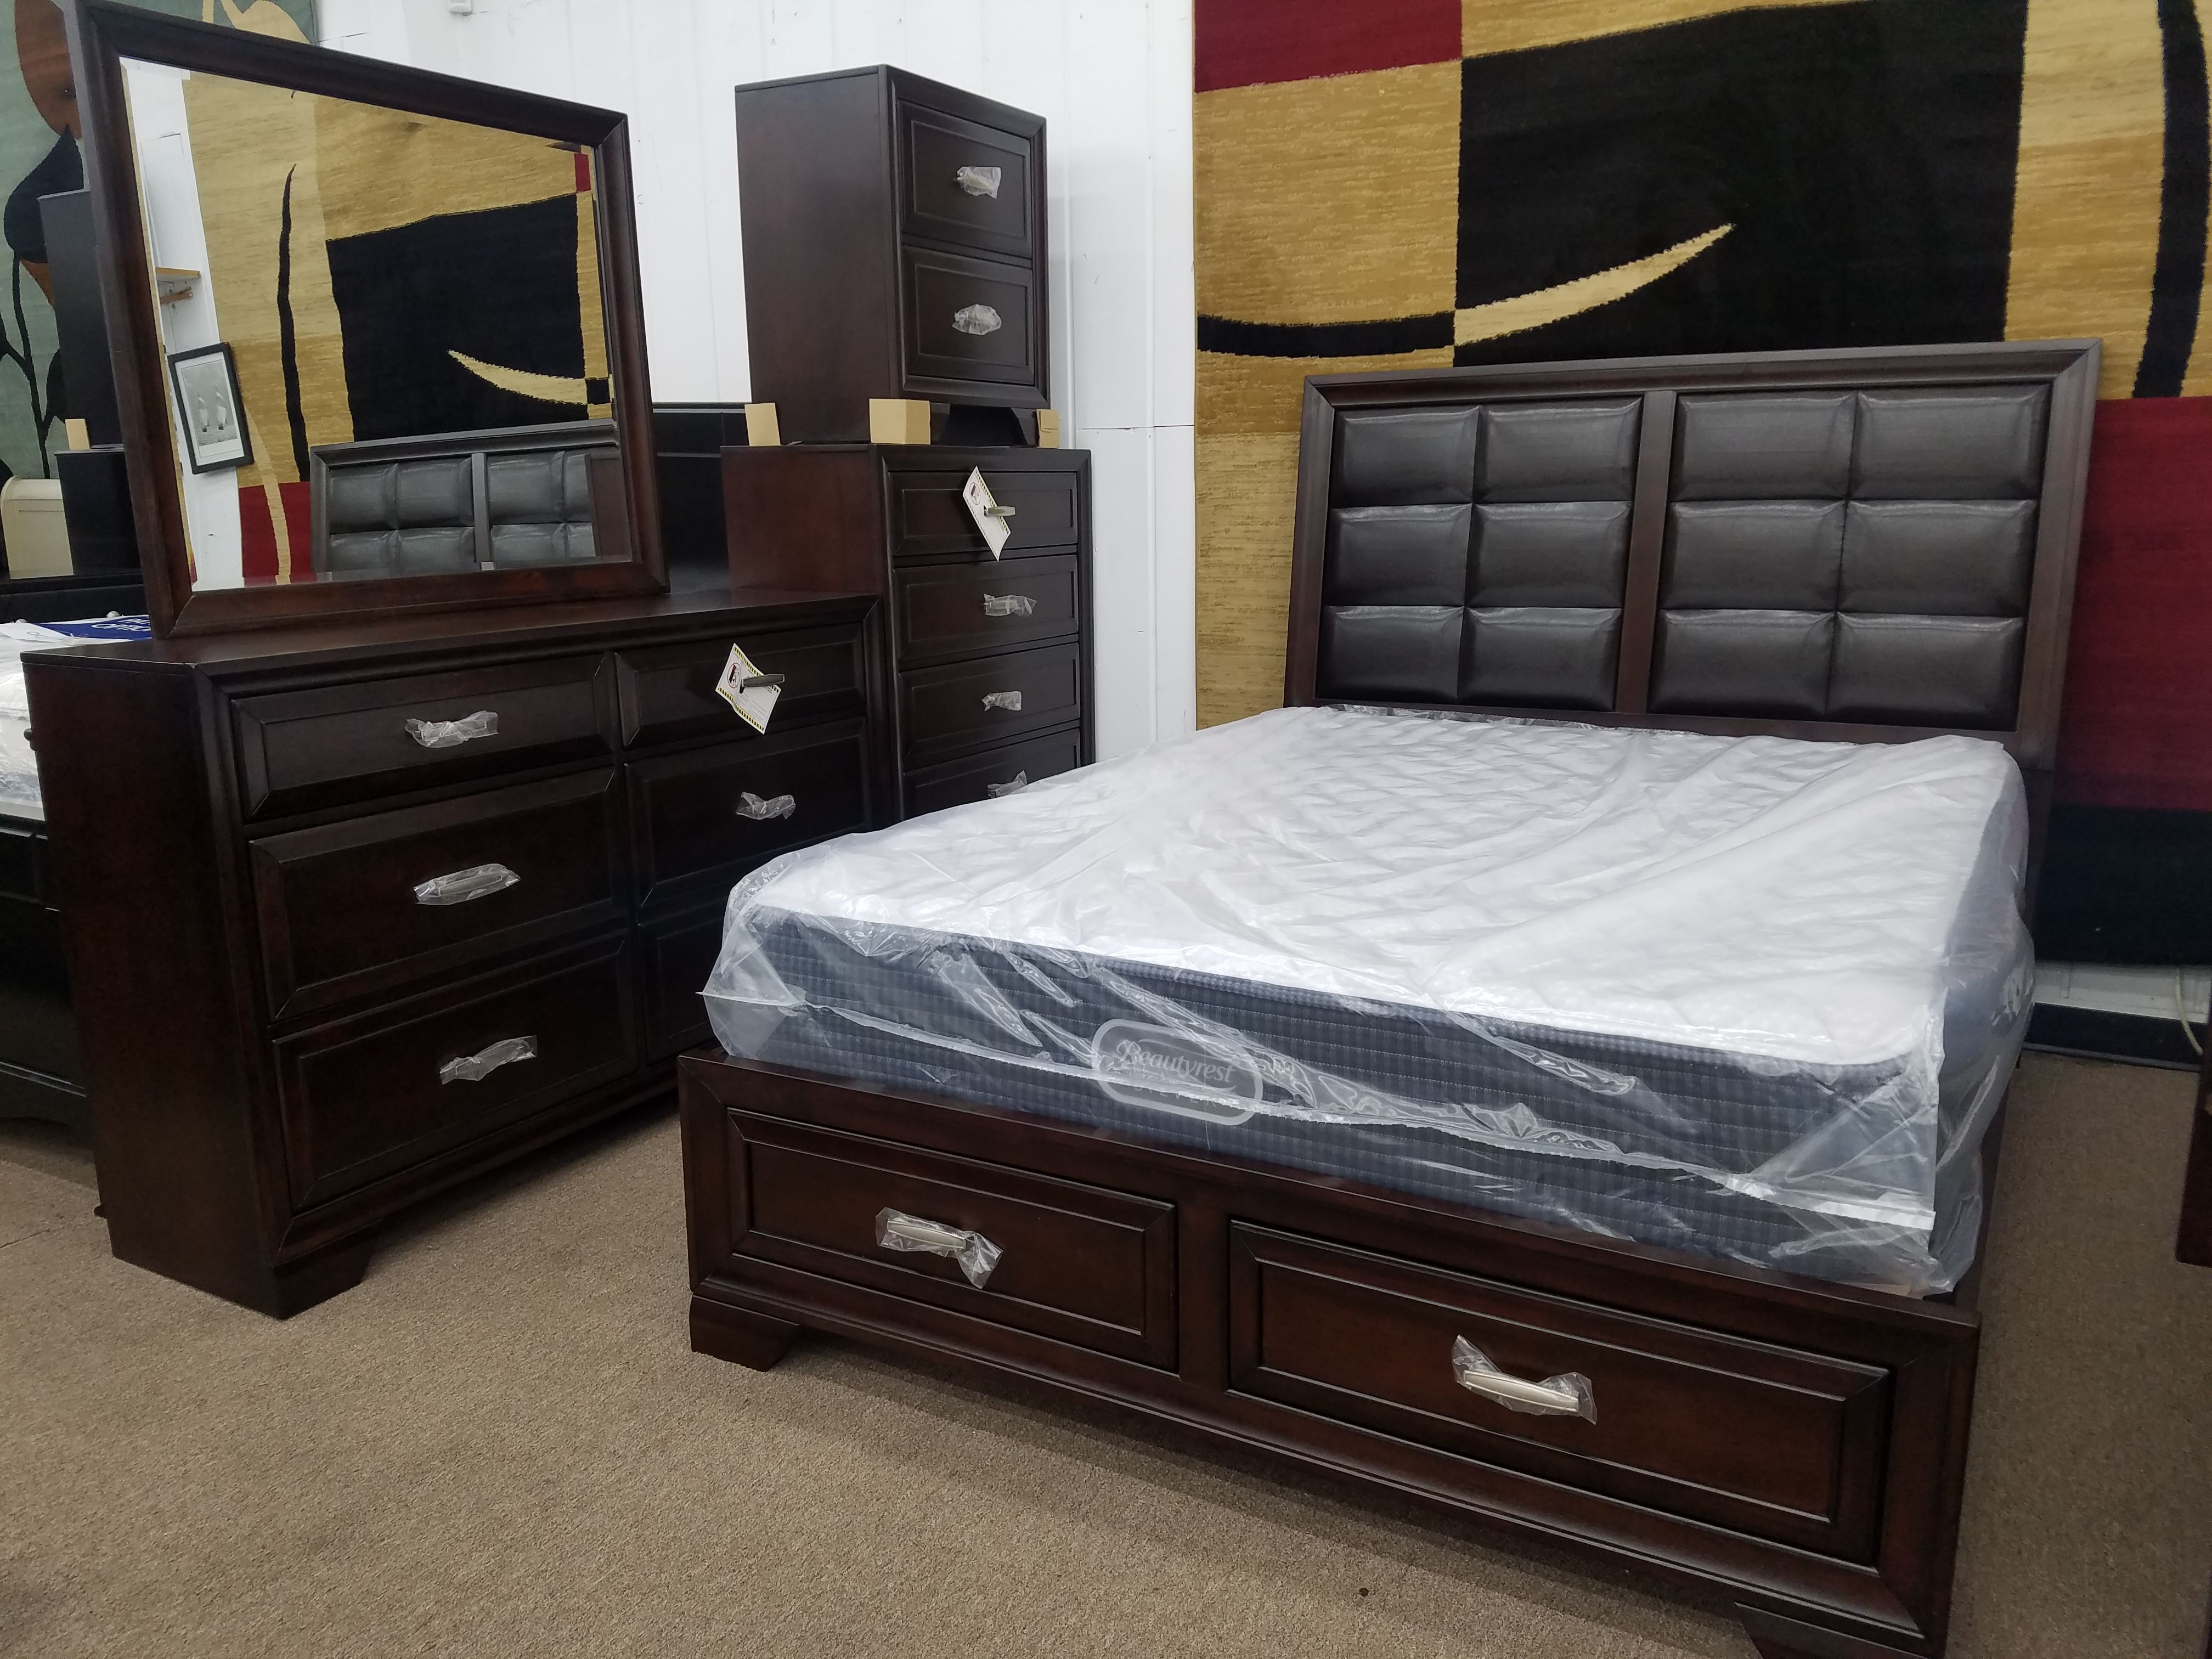 Brand new dark espresso color queen size storage bedroom set complete with padded headboard